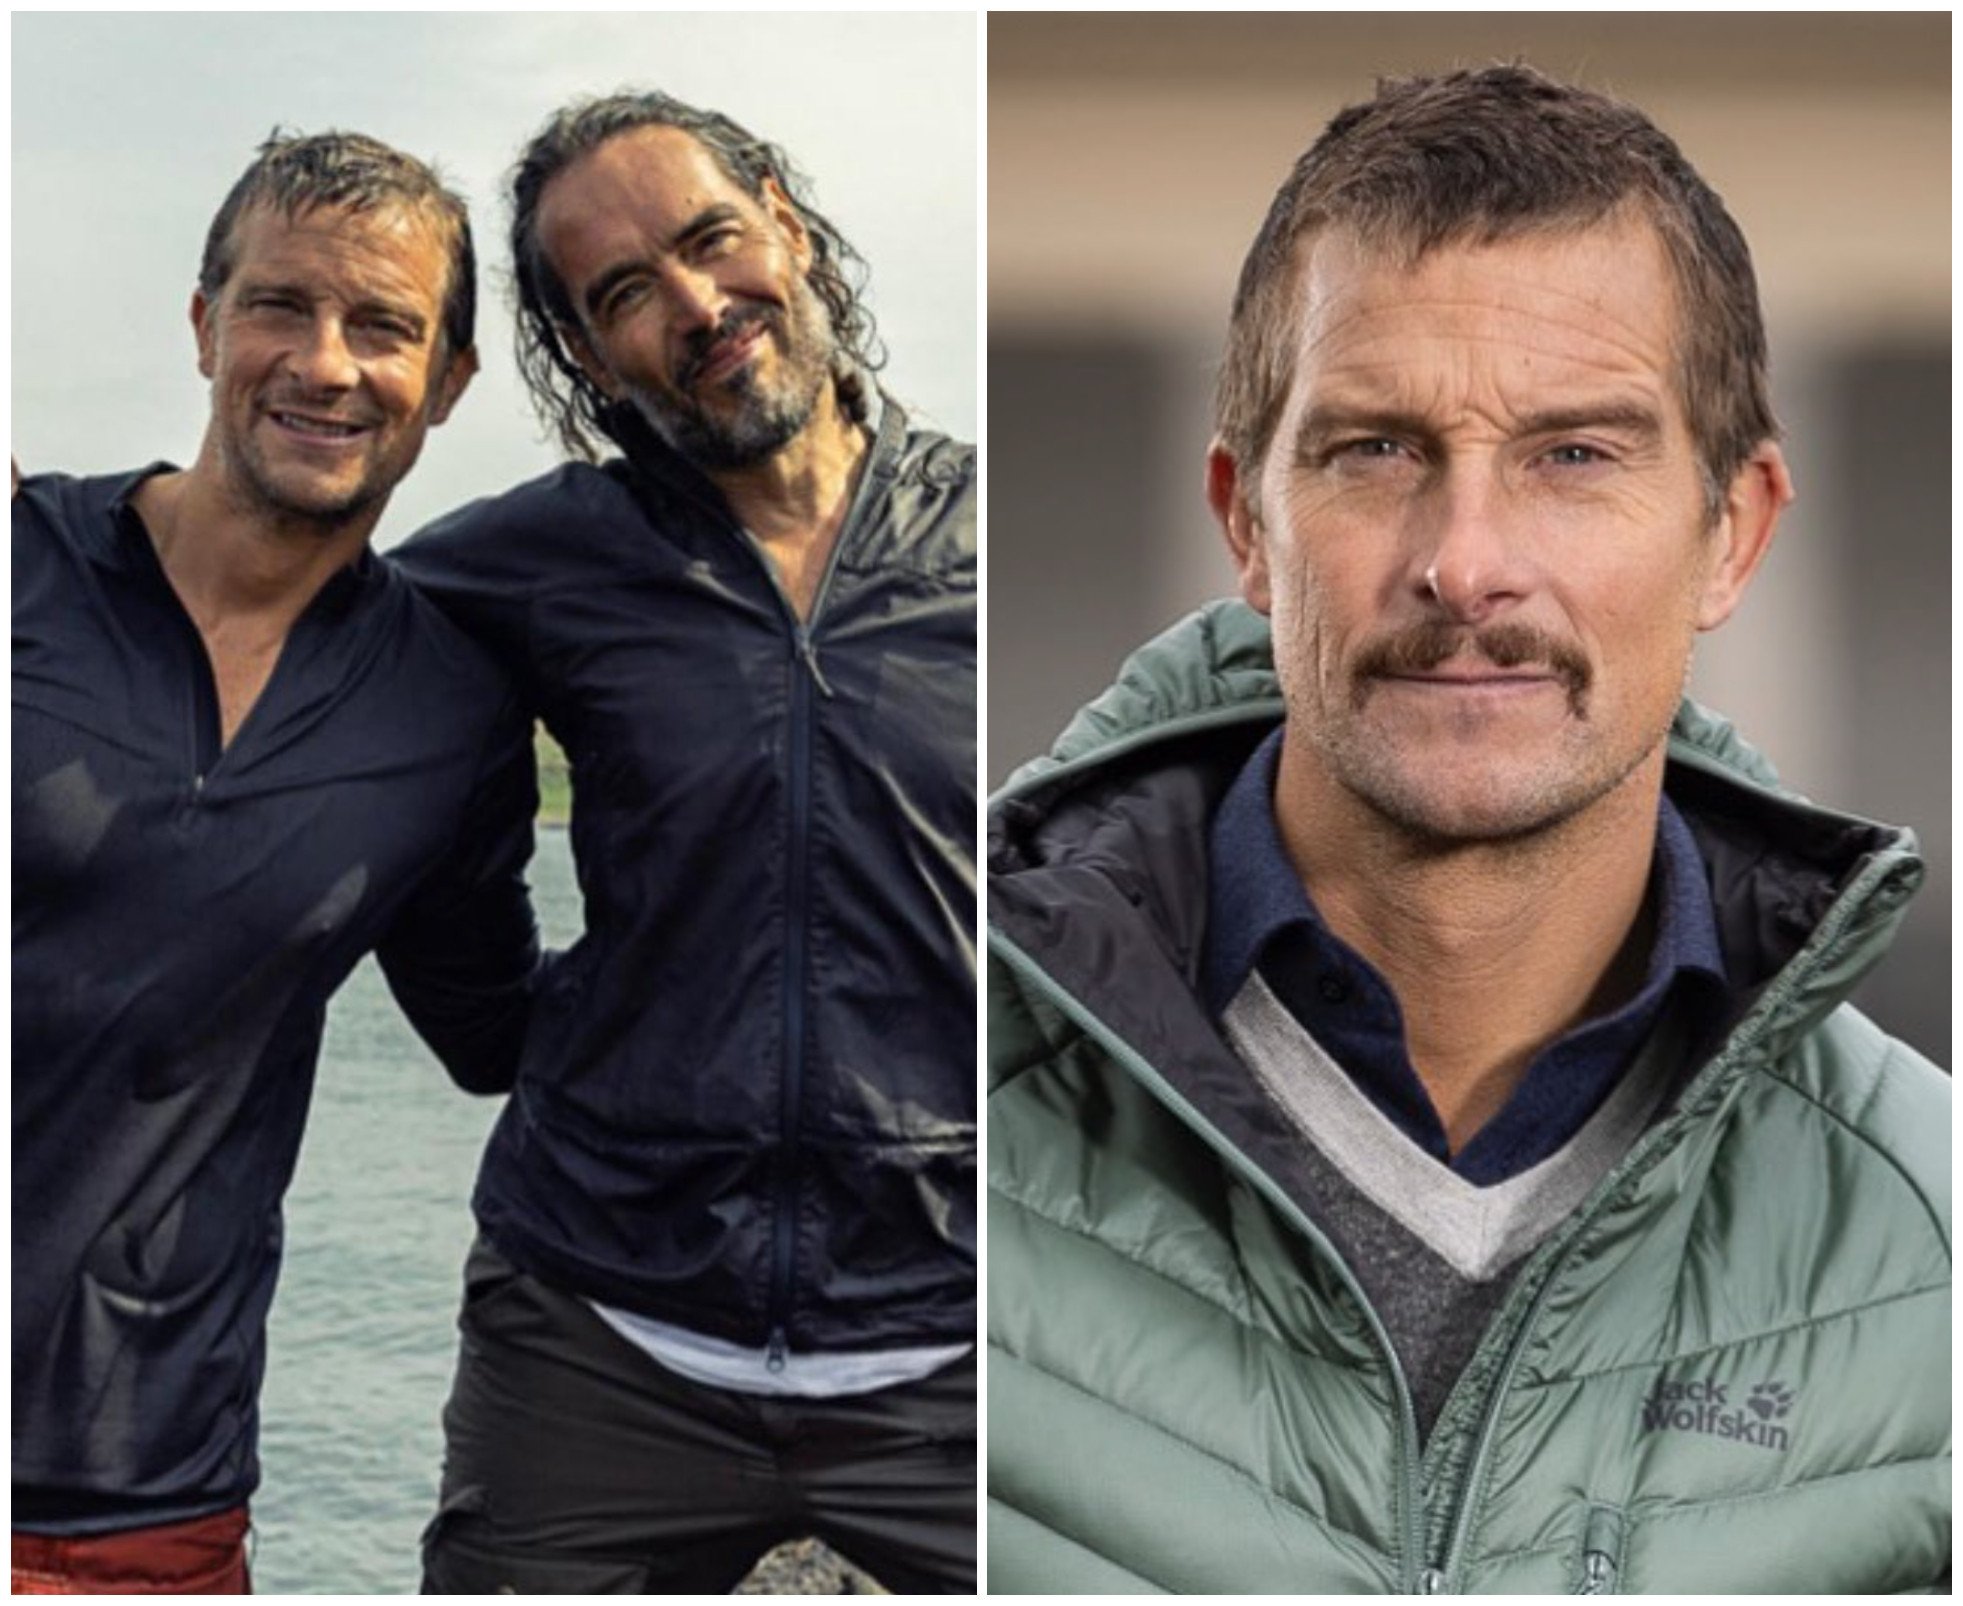 Bear Grylls has connections with celebrities like Russell Brand, but he’s also controversial. Photos: @beargrylls/Instagram